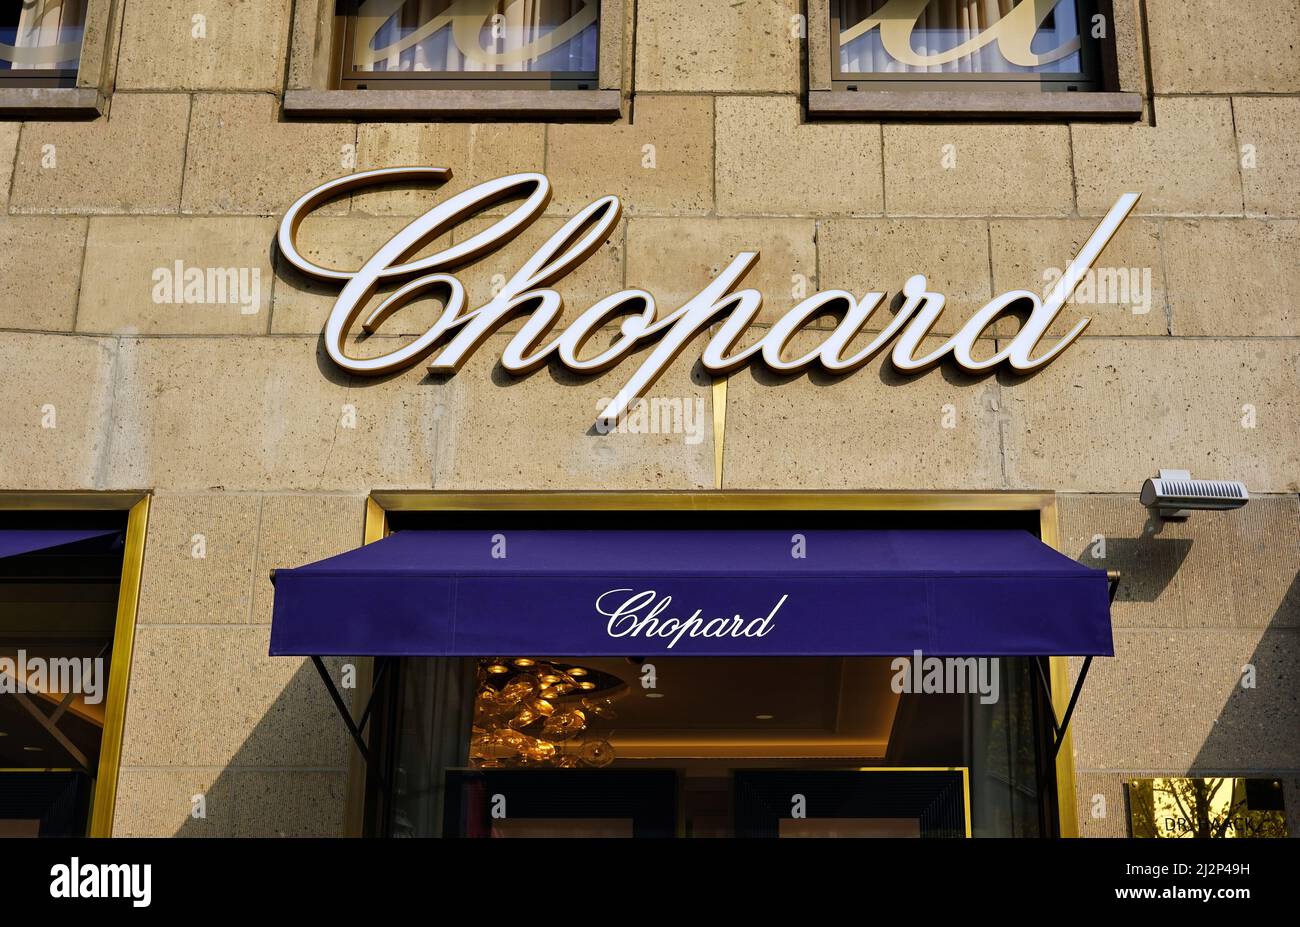 Close-up of a Chopard store front in Düsseldorf/Germany. Chopard is a family-owned Swiss manufacturer of luxury watches, jewelry and accessories. Stock Photo